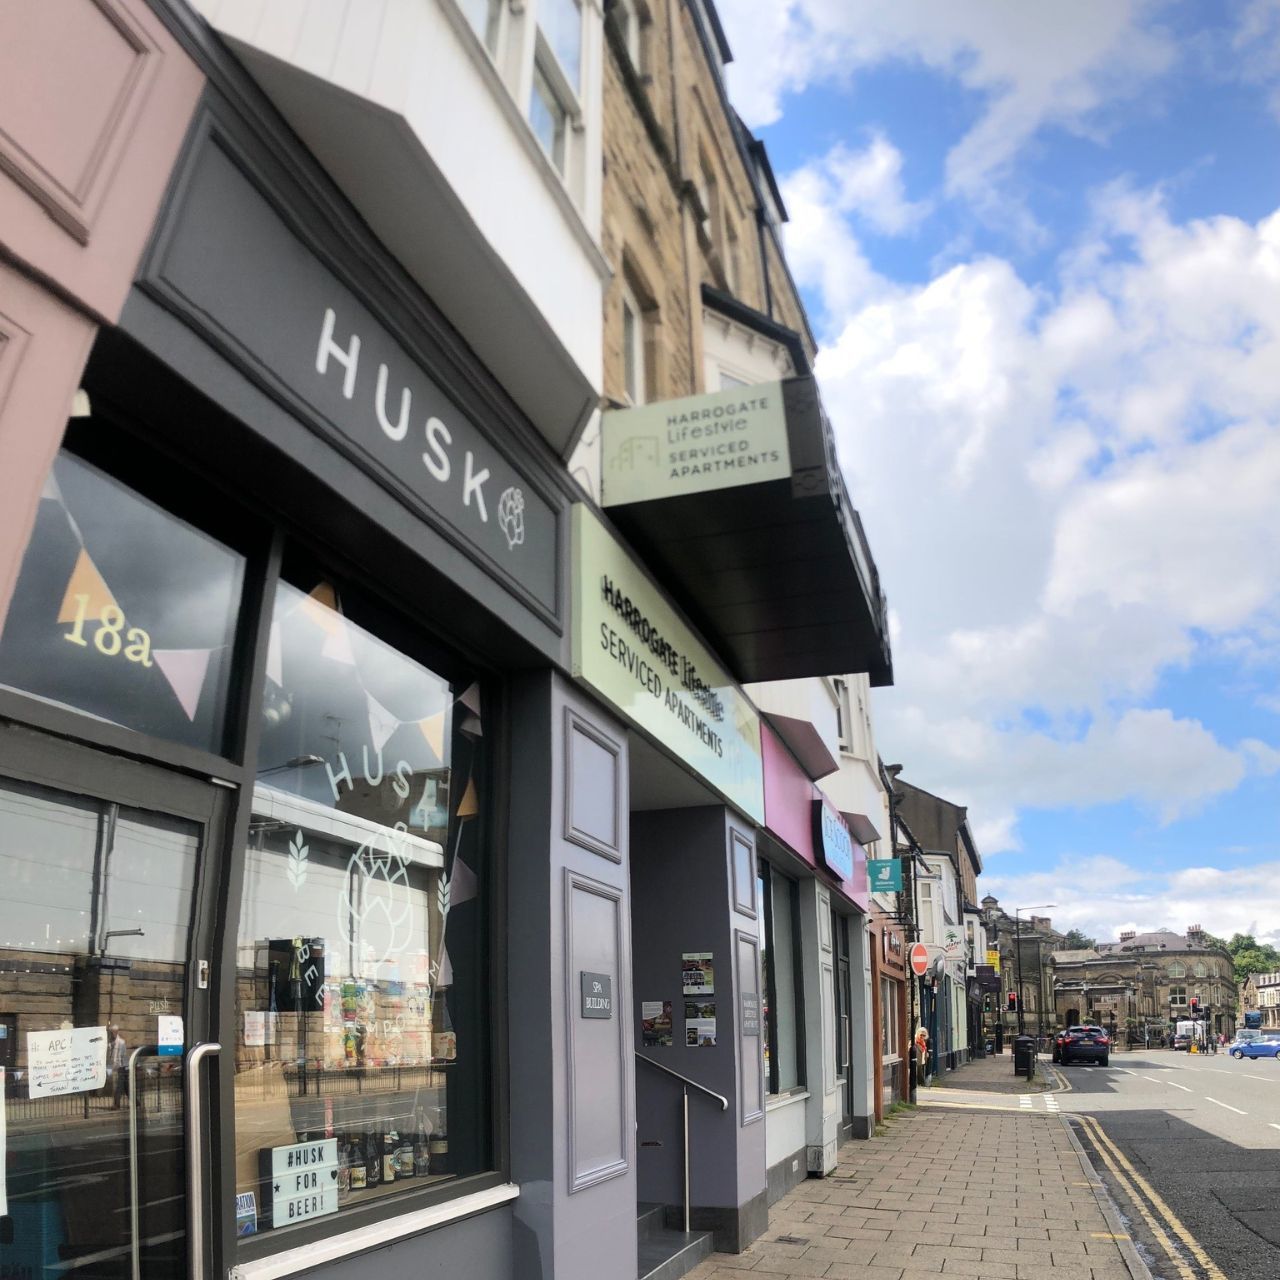 Harrogate Lifestyle Luxury Serviced Apartments property building entrance 18 Kings Road 18 Spa Building